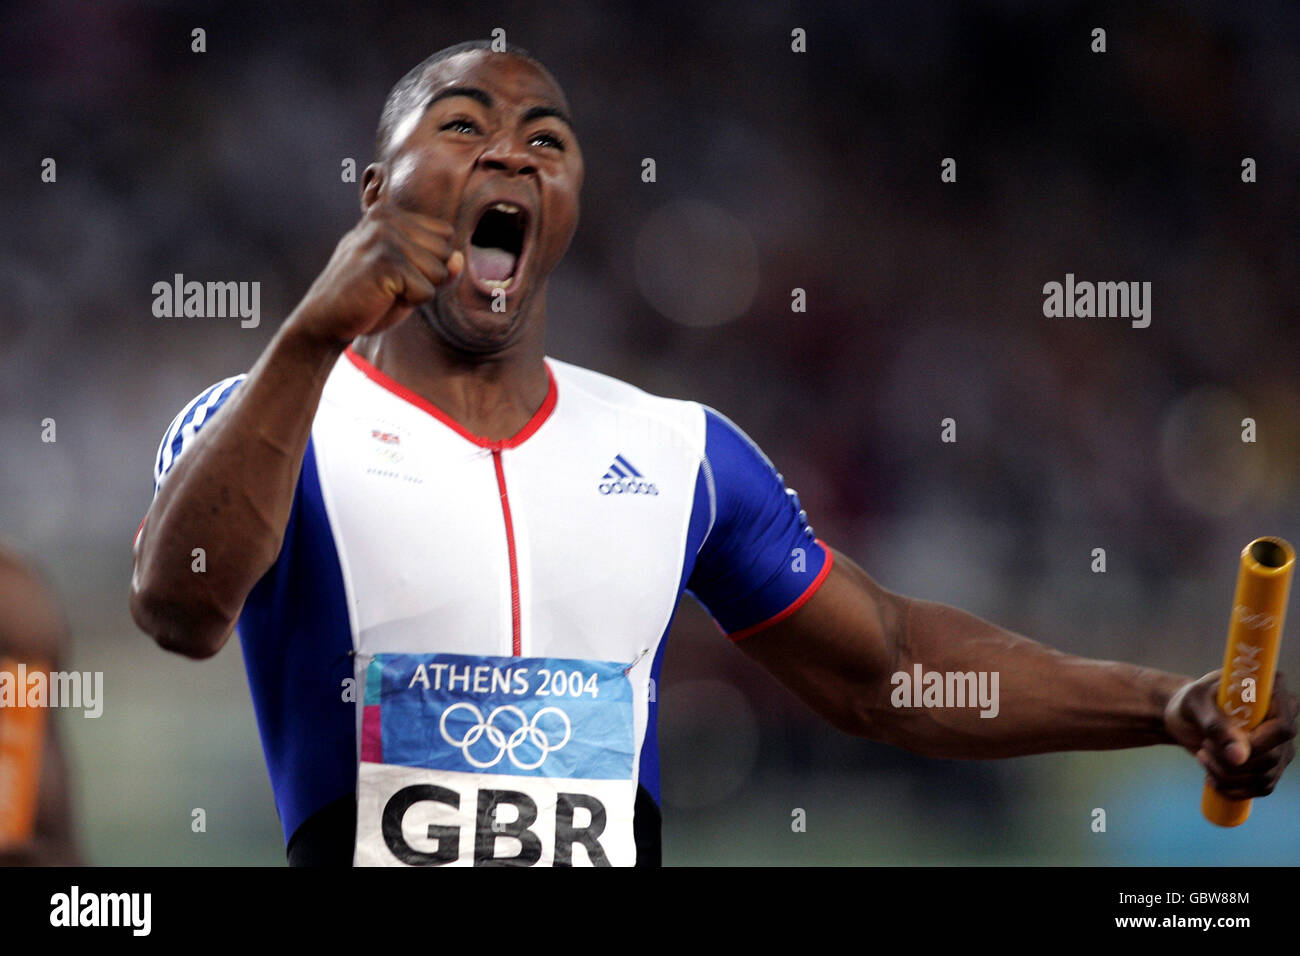 Athletics - Athens Olympic Games 2004 - Men's 4 x 100m Relay - Final. Great Britain's Mark Lewis-Francis celebrates after bringing the 4x100m relay team home to the gold medal Stock Photo